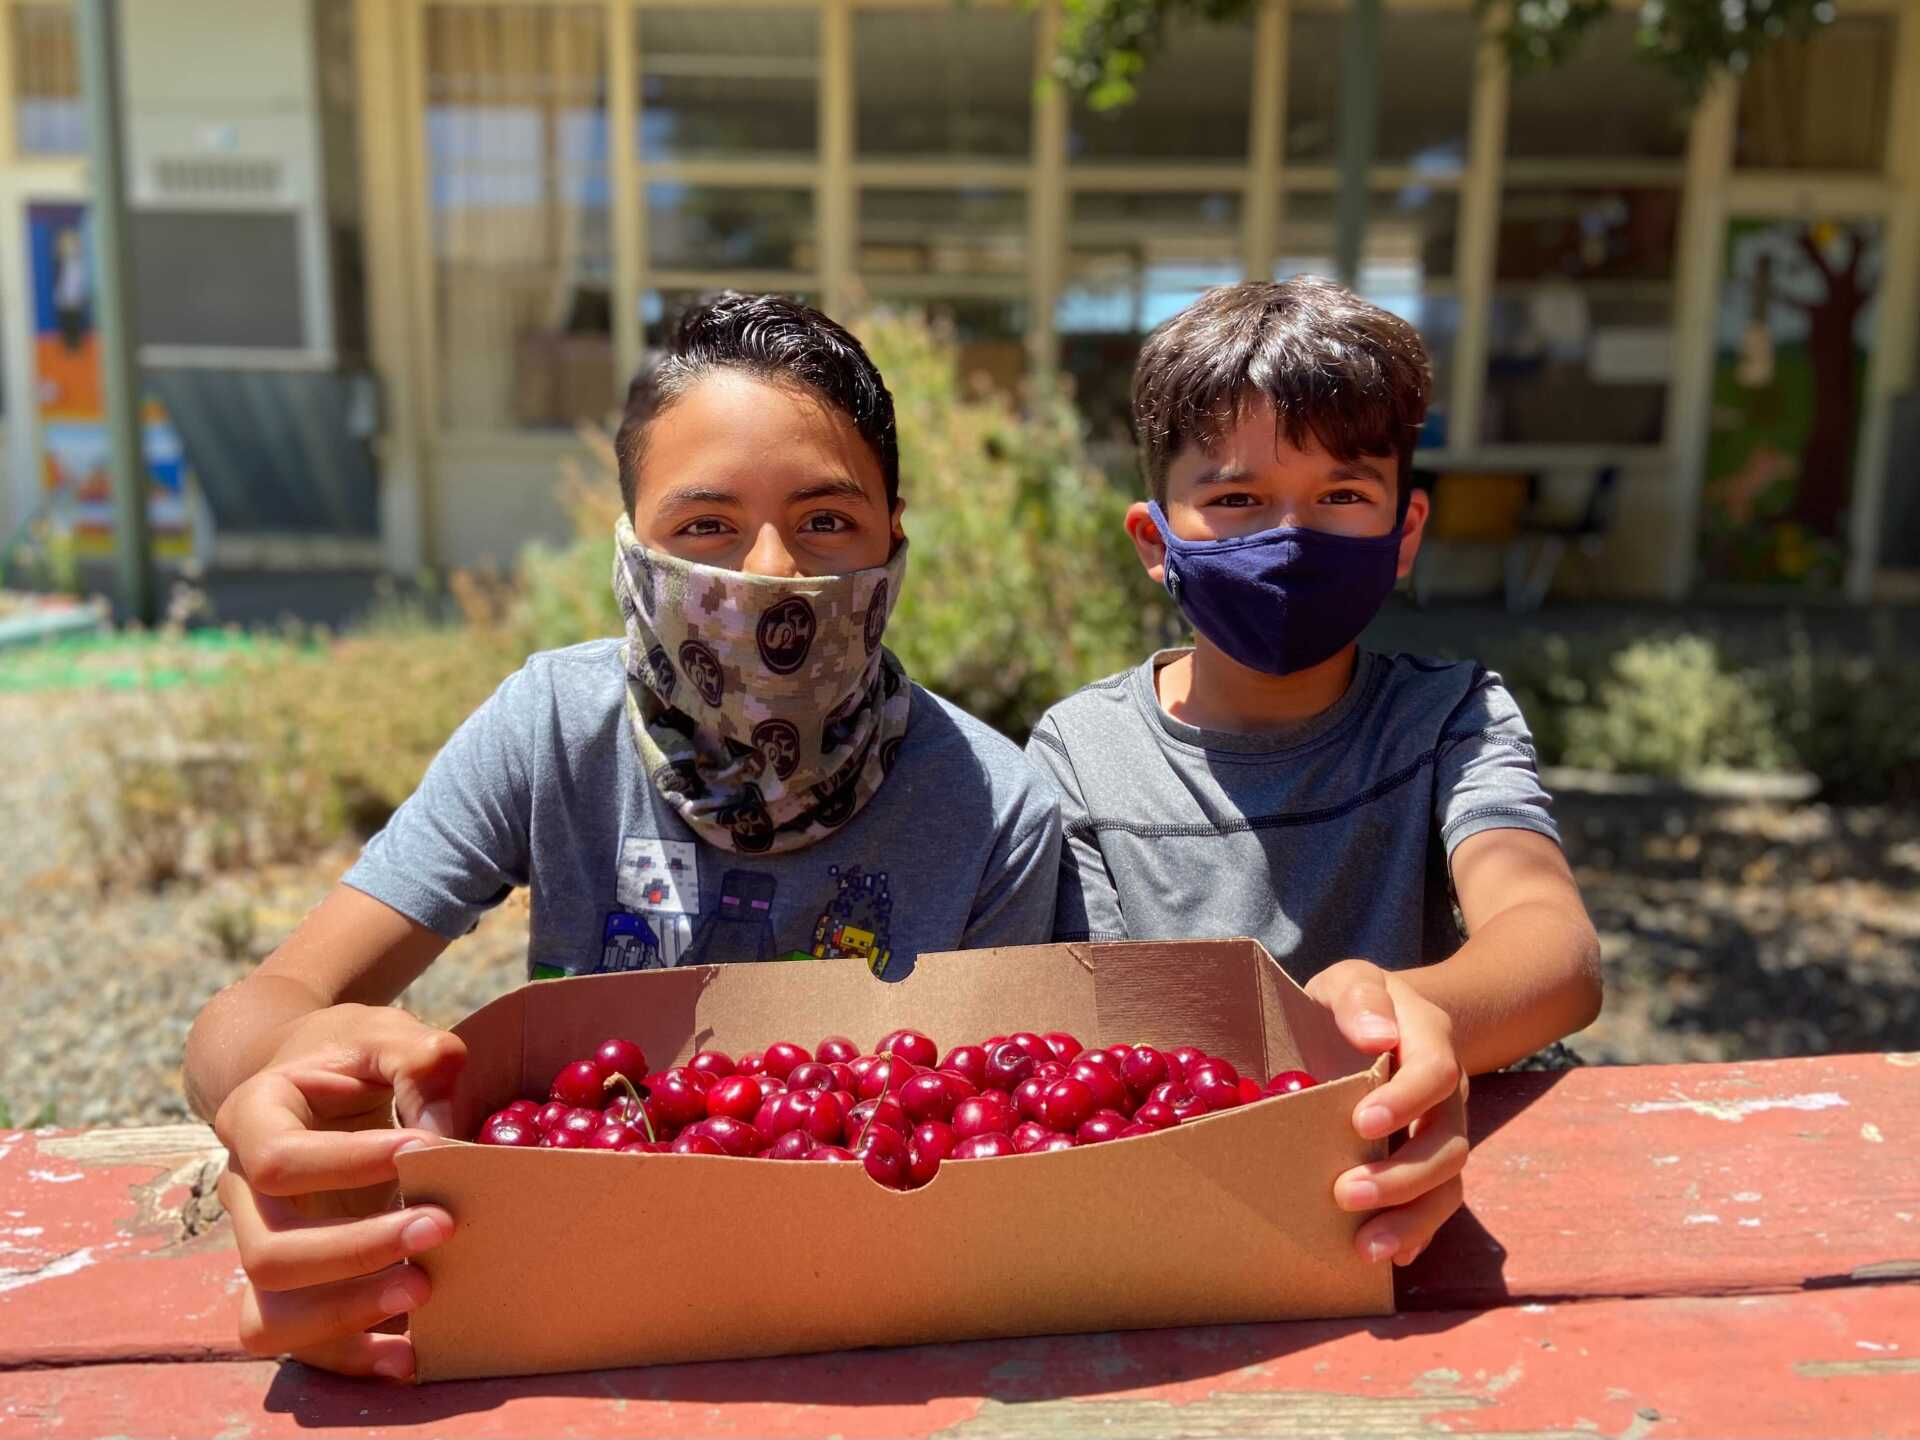 Children hold a box of cherries from the school garden